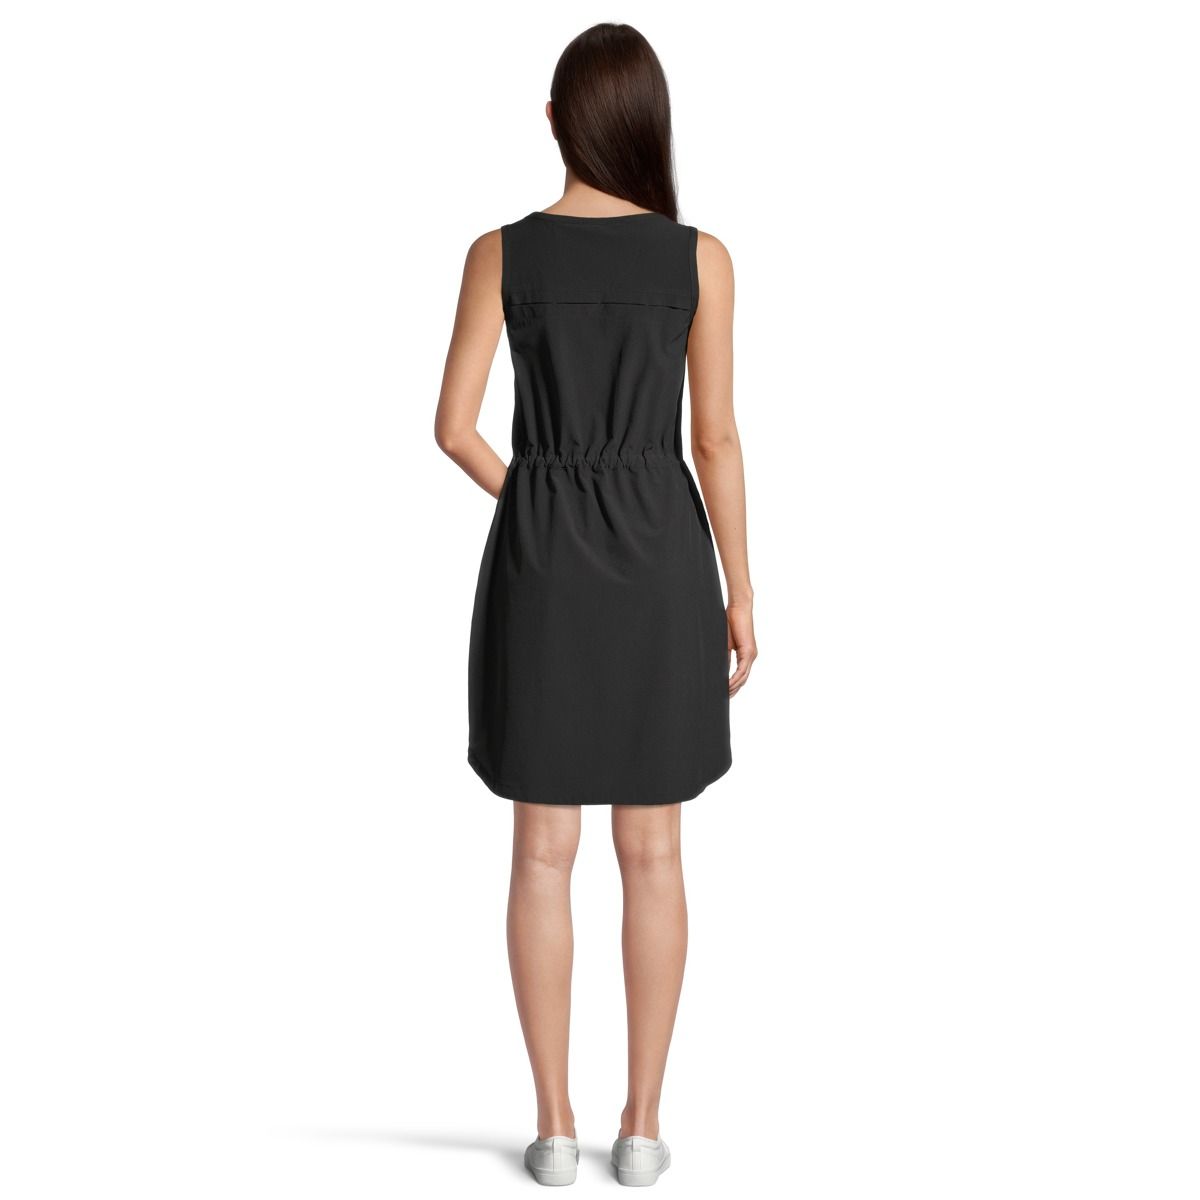 https://media-www.sportchek.ca/product/div-03-softgoods/dpt-72-casual-clothing/sdpt-02-womens/333593544/woods-w-rossland-travel-dress-s22-elderberry-59cb32a0-91e1-439a-b0bb-28152414a5d6-jpgrendition.jpg?imdensity=1&imwidth=1244&impolicy=mZoom